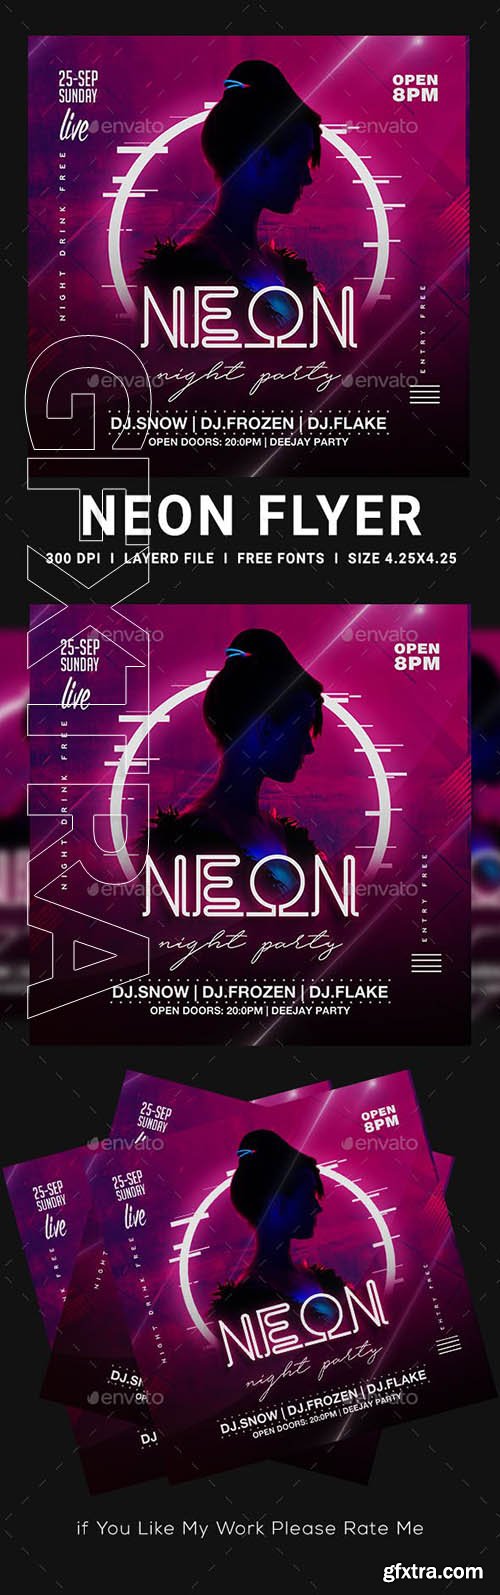 GraphicRiver - Neon Party Flyer 23537729